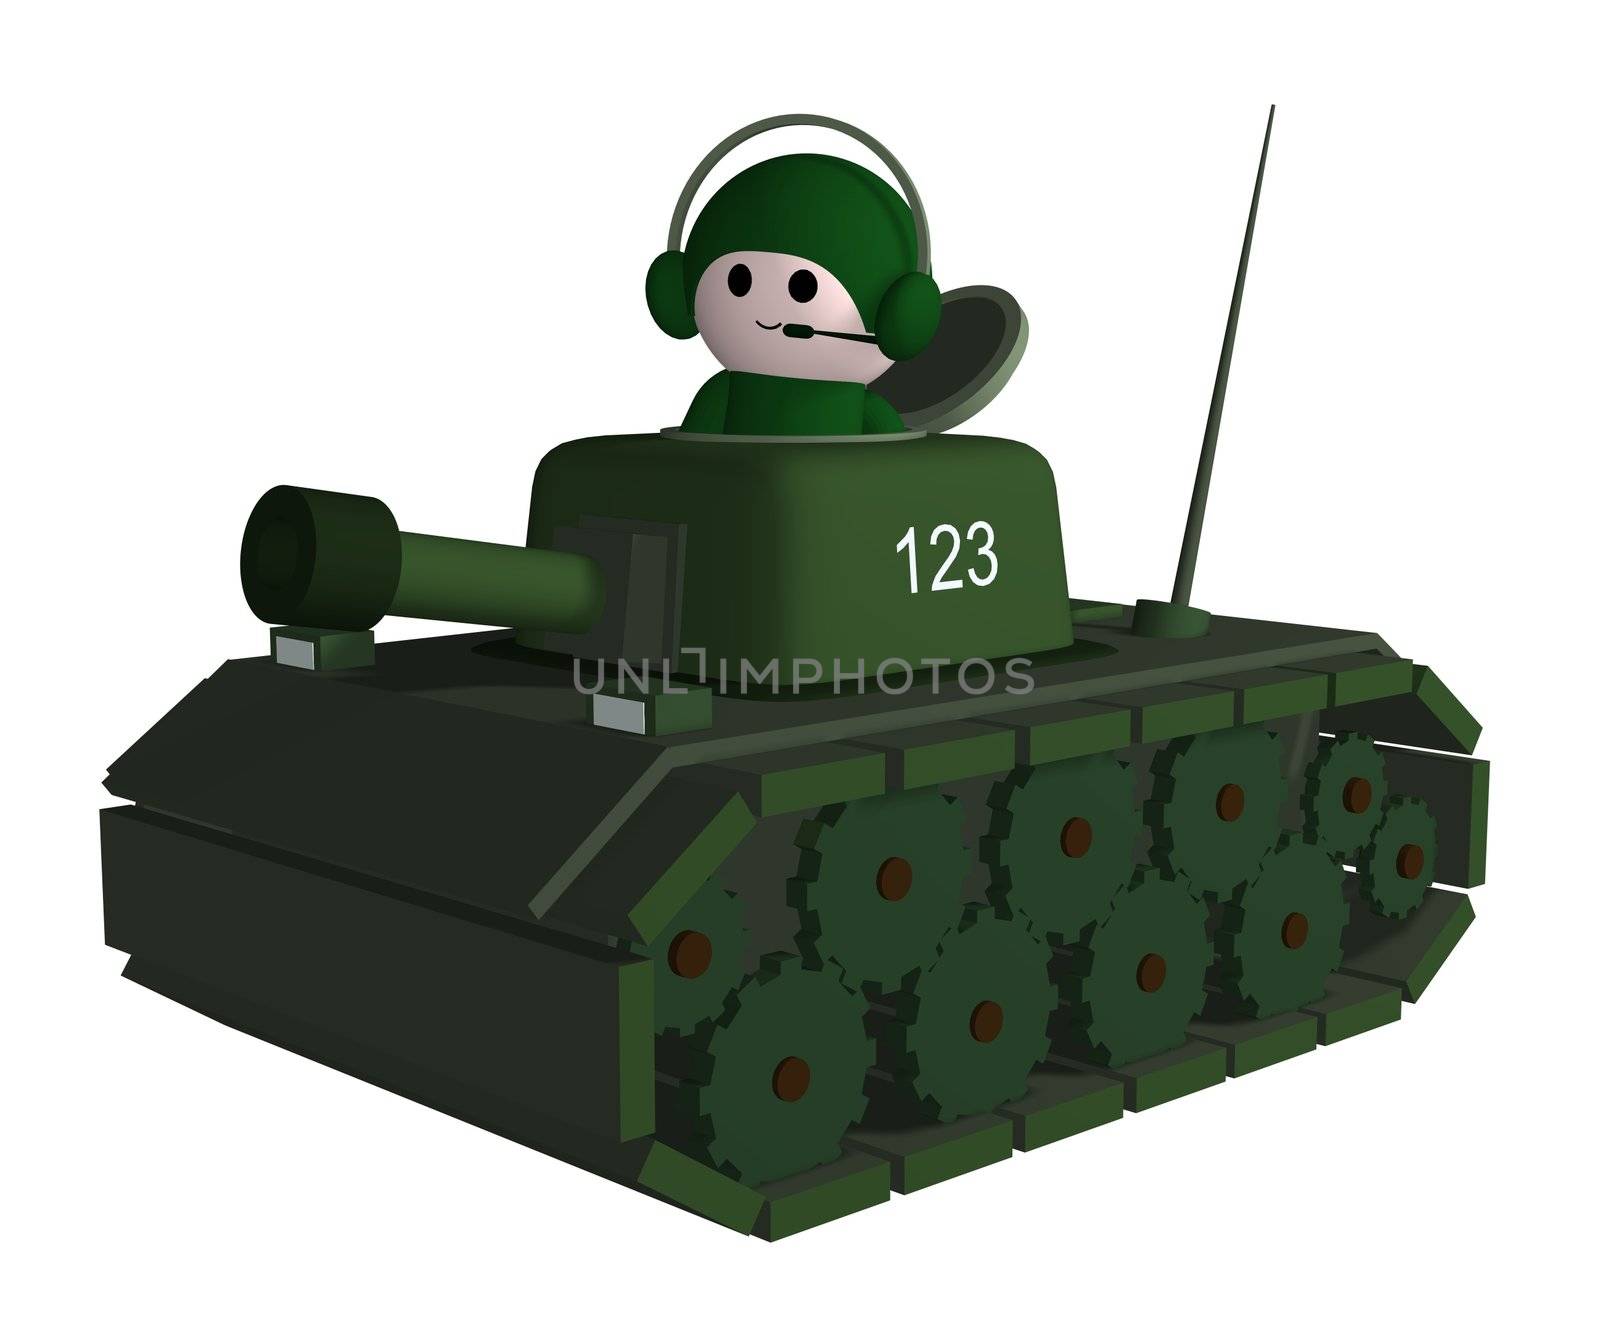 Illustration of a person driving a tank